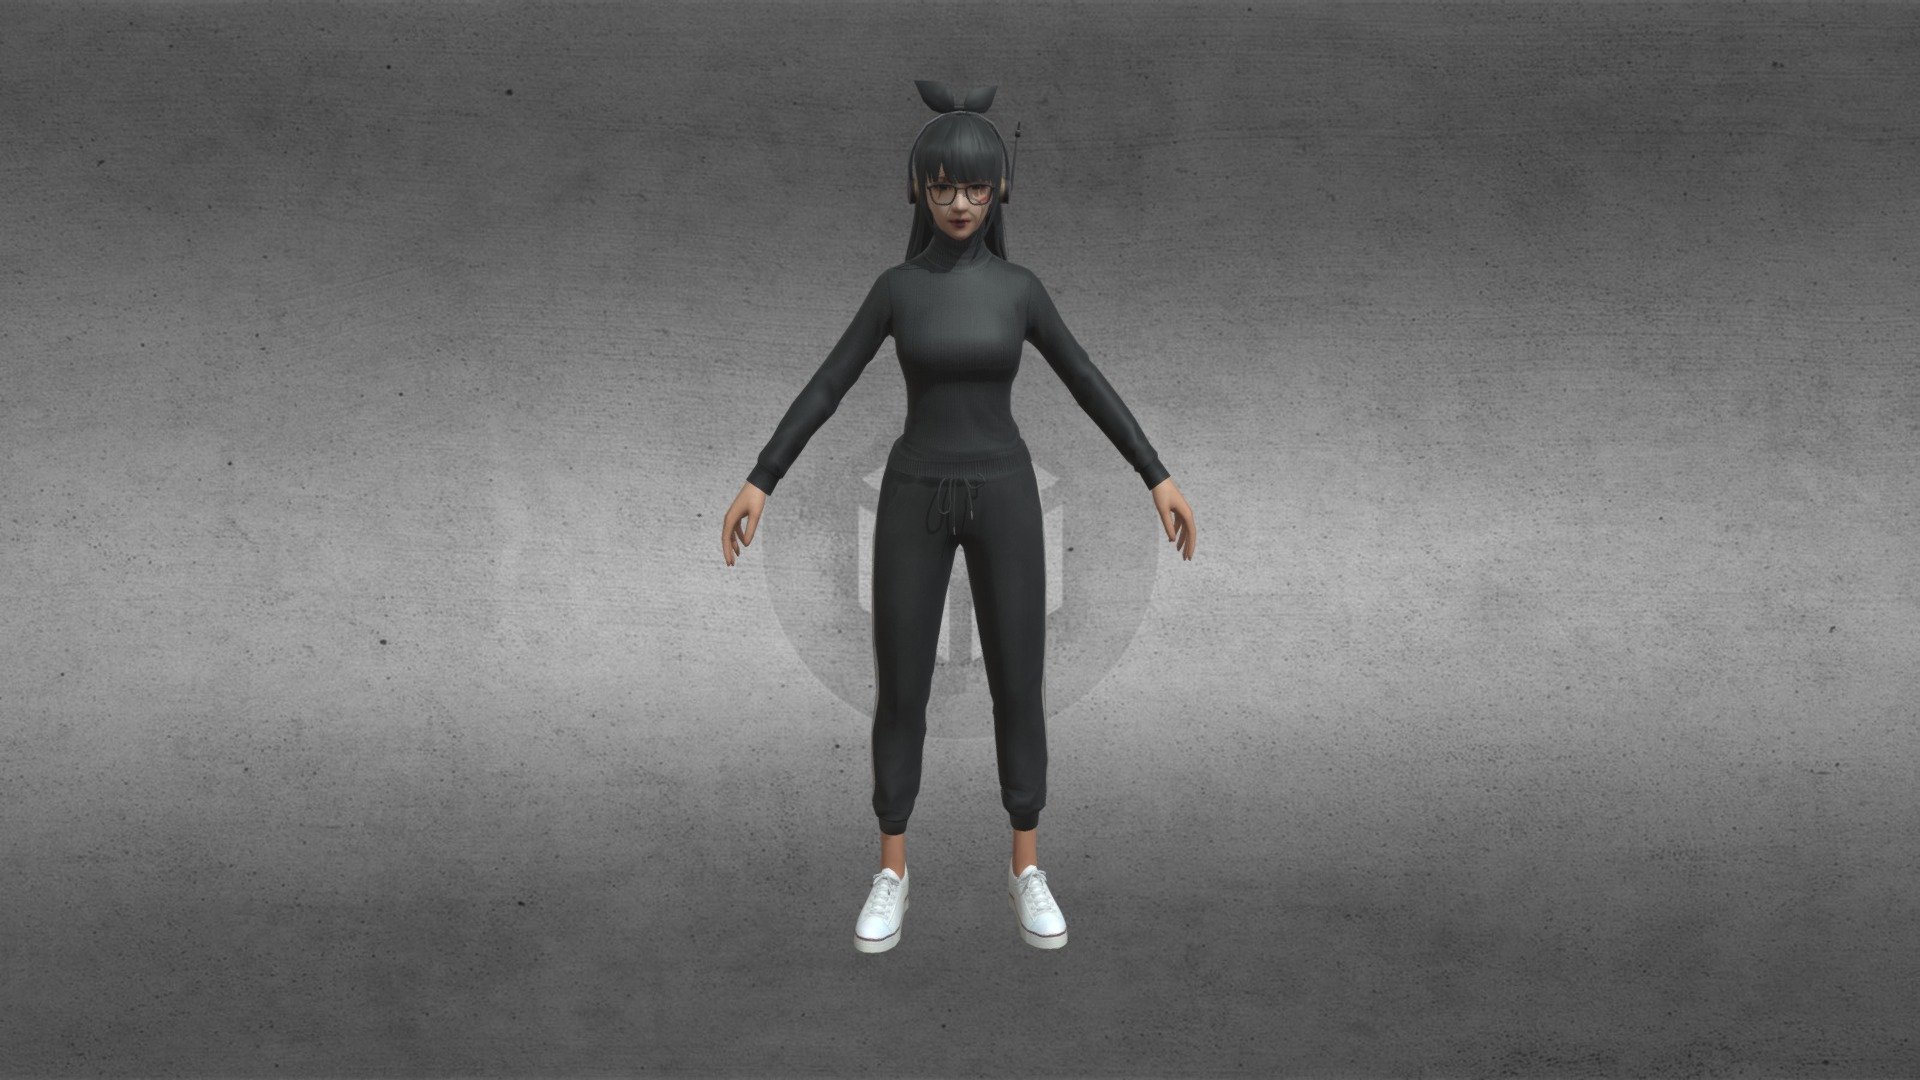 GIVE CREDIT IF YOU ARE USING THIS MODEl
CONTACT ON INSTAGRAM FOR THIS MODEL - abz_53
FOLLOW FOR MORE MODELS
SUBSCRIBE - PACE GAMING - freefire new girl 3d model by pace gaming - Download Free 3D model by PACE GAMING FF (@MDARBAZ_.OR___-PACEGAMINGFF) 3d model